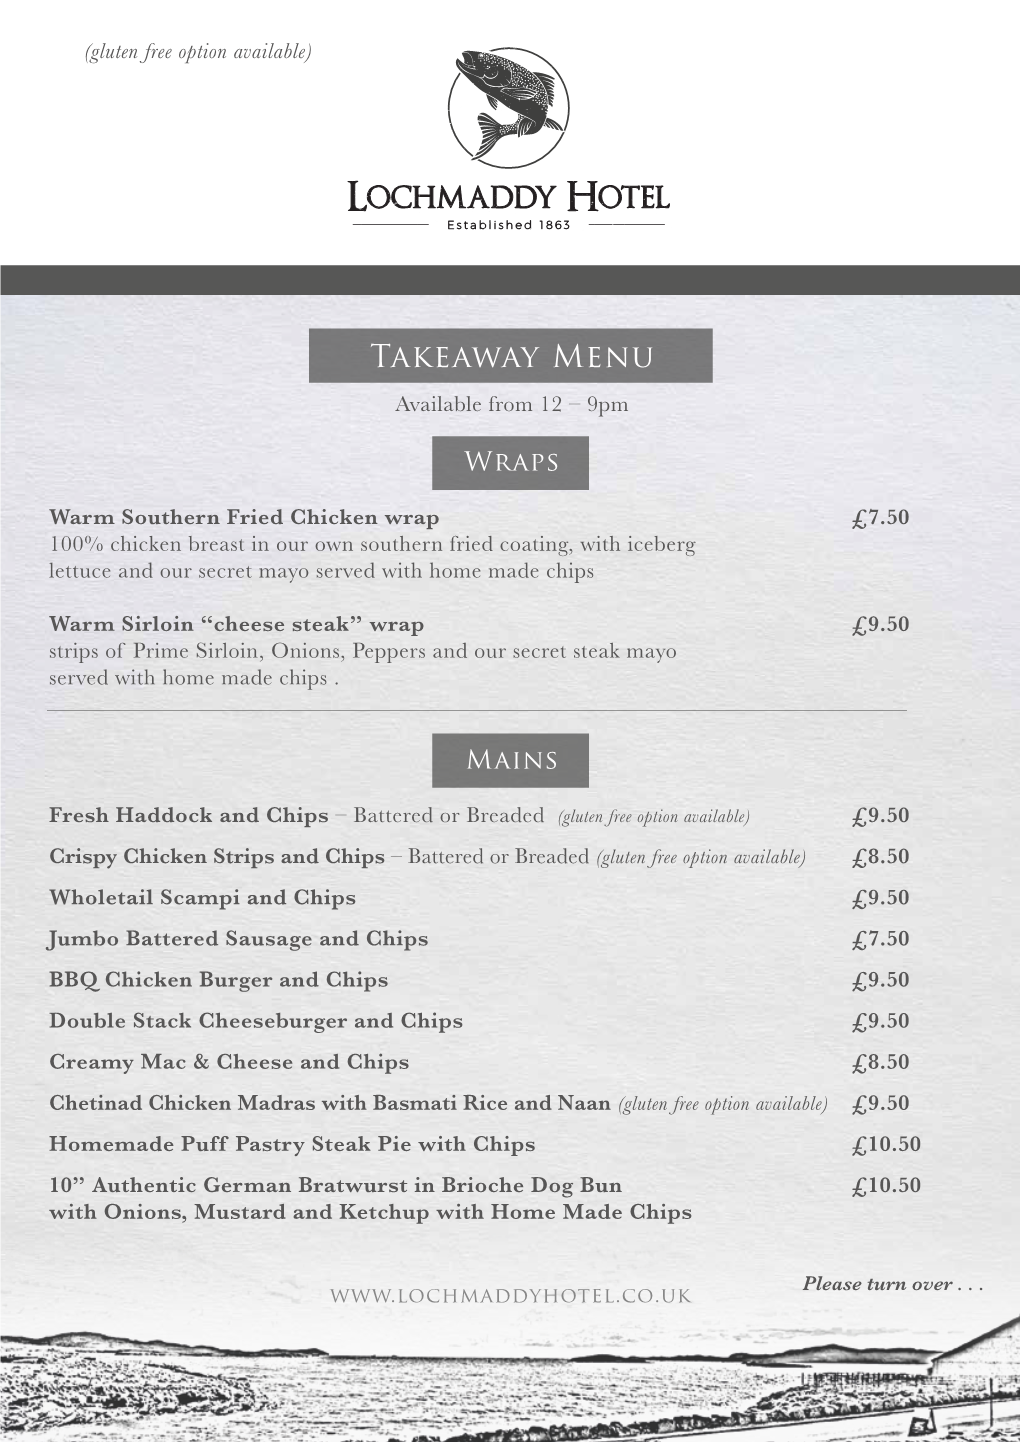 Takeaway Menu Available from 12 – 9Pm